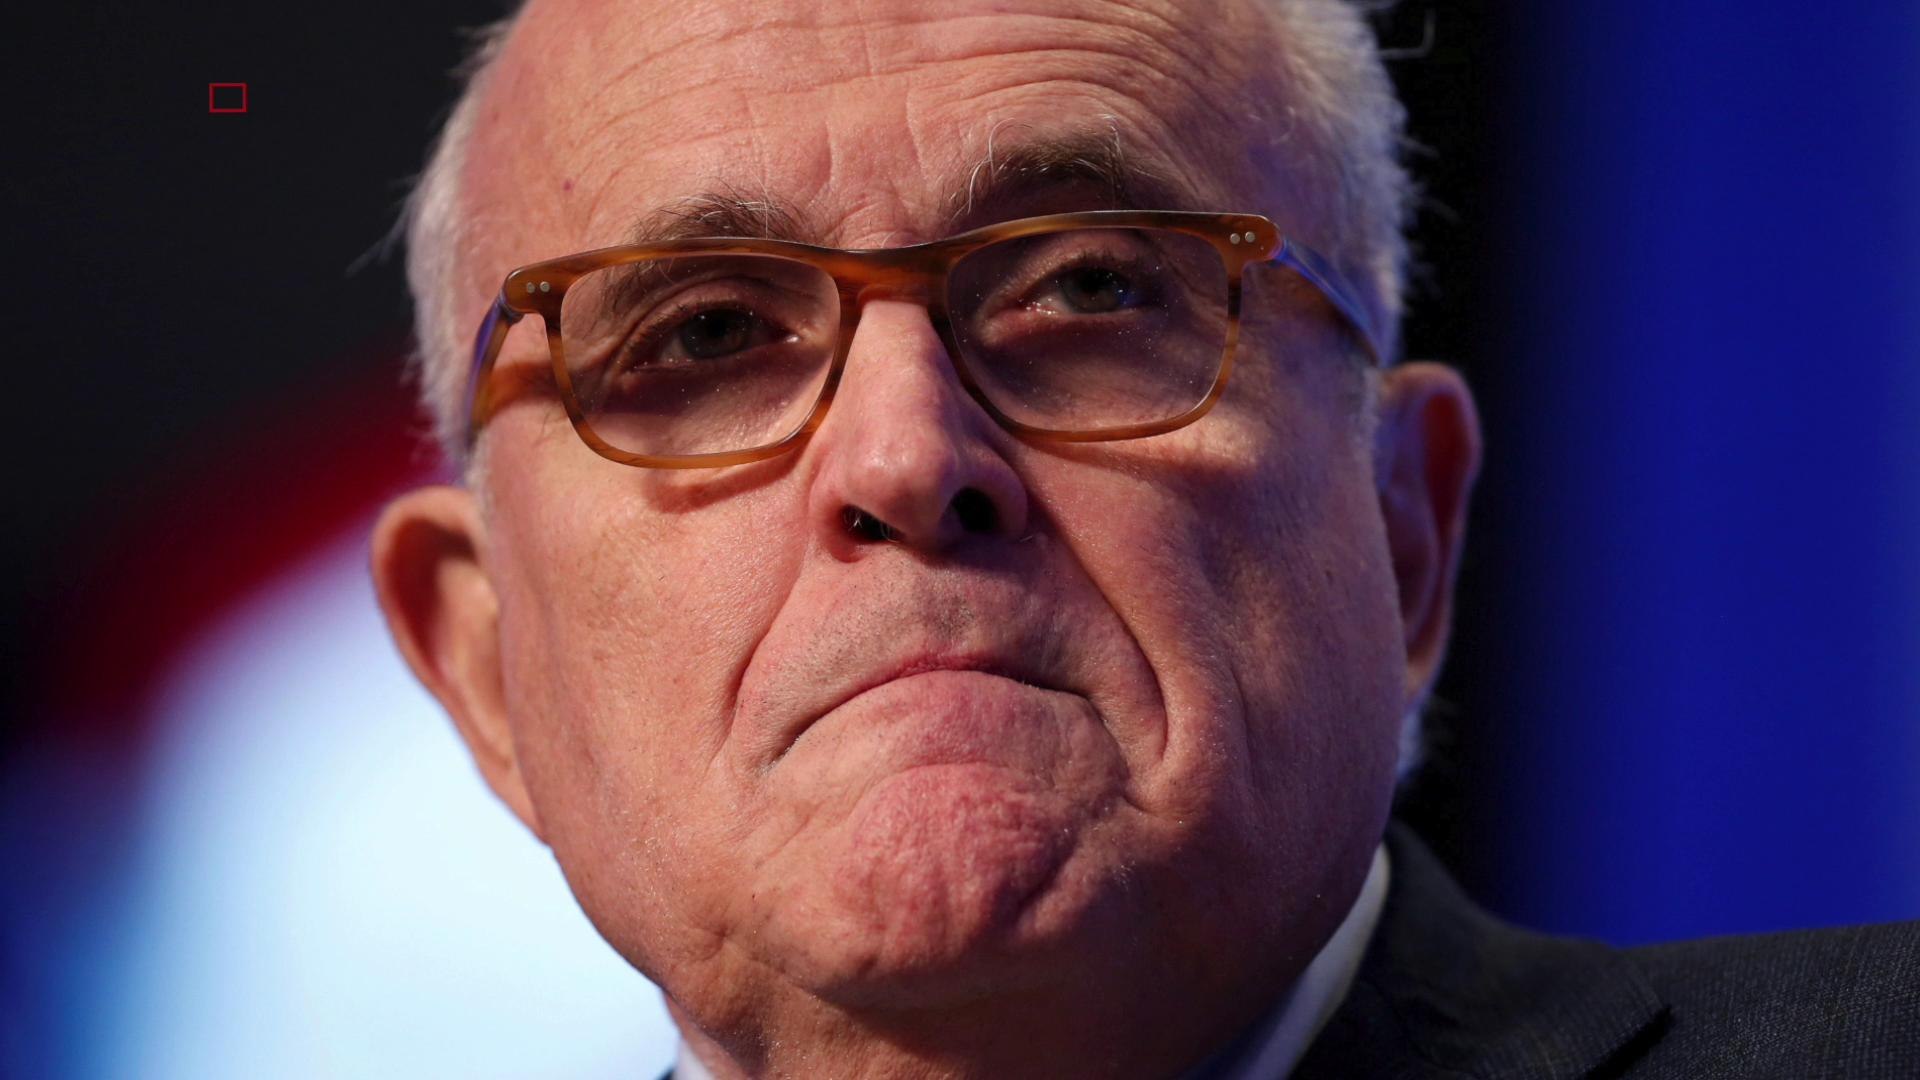 Rudy Giuliani Gets Roasted For Tweetstorm About Witches